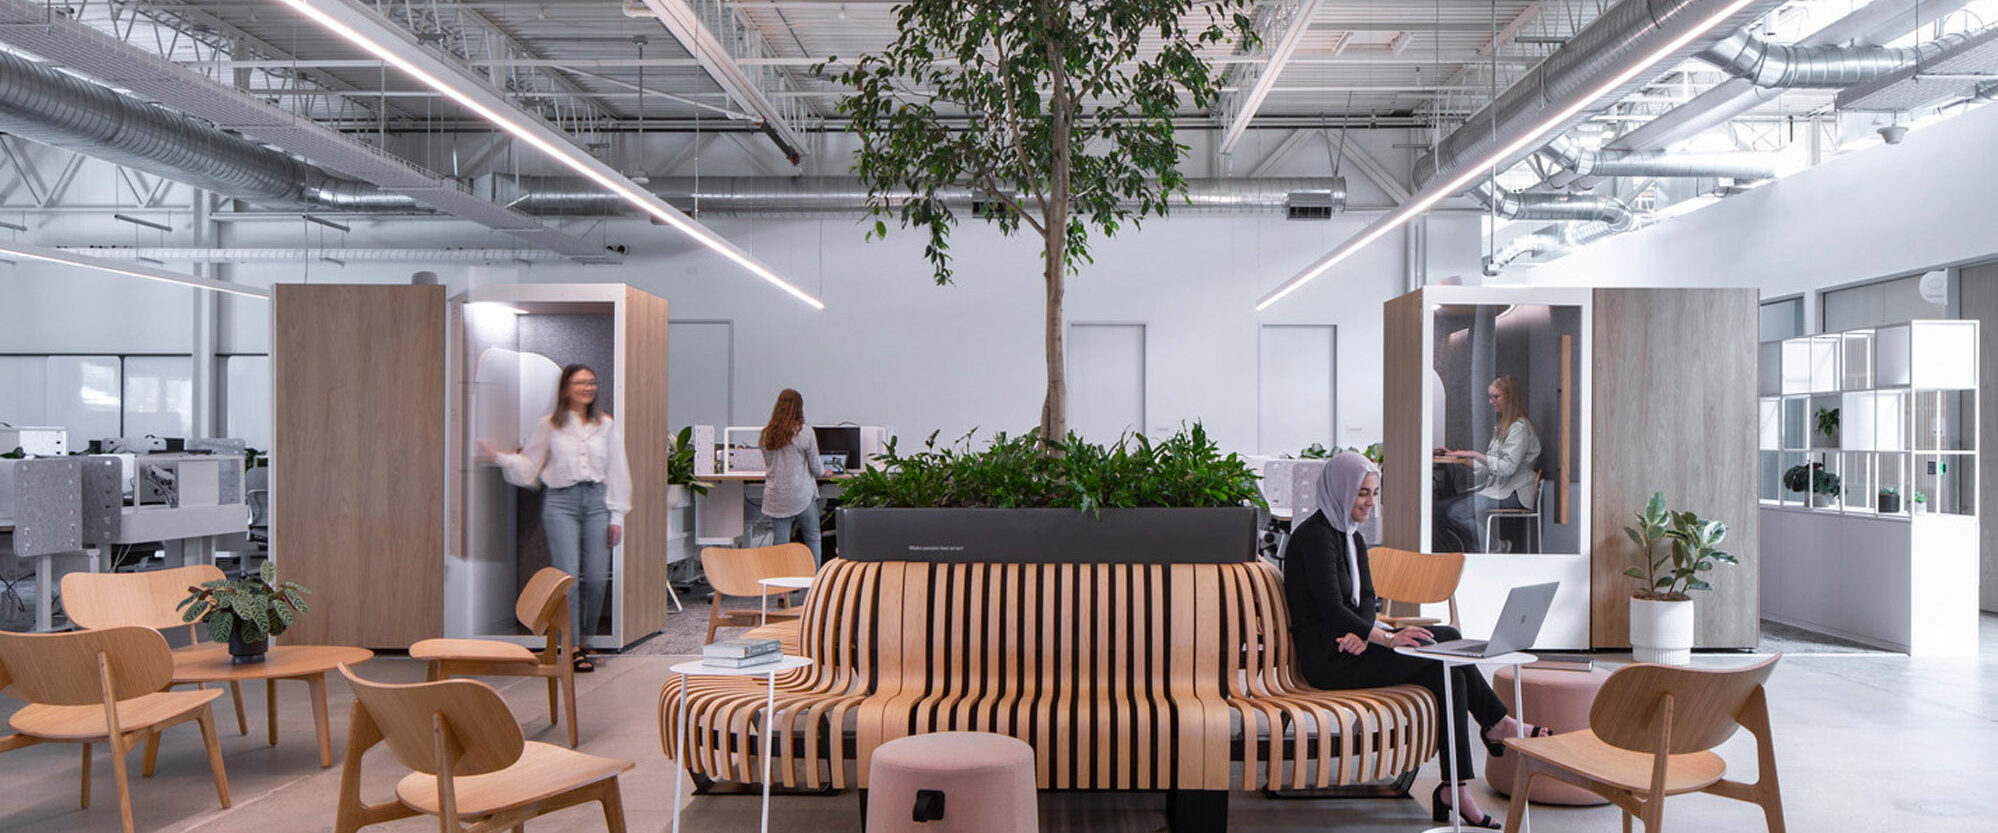 Spacious office interior bathed in natural light, featuring an eclectic mix of modern wooden desks, upholstered couches, and an indoor planting area offering a blend of functionality and biophilic design. Overhead exposed ductwork complements the industrial-chic aesthetic.